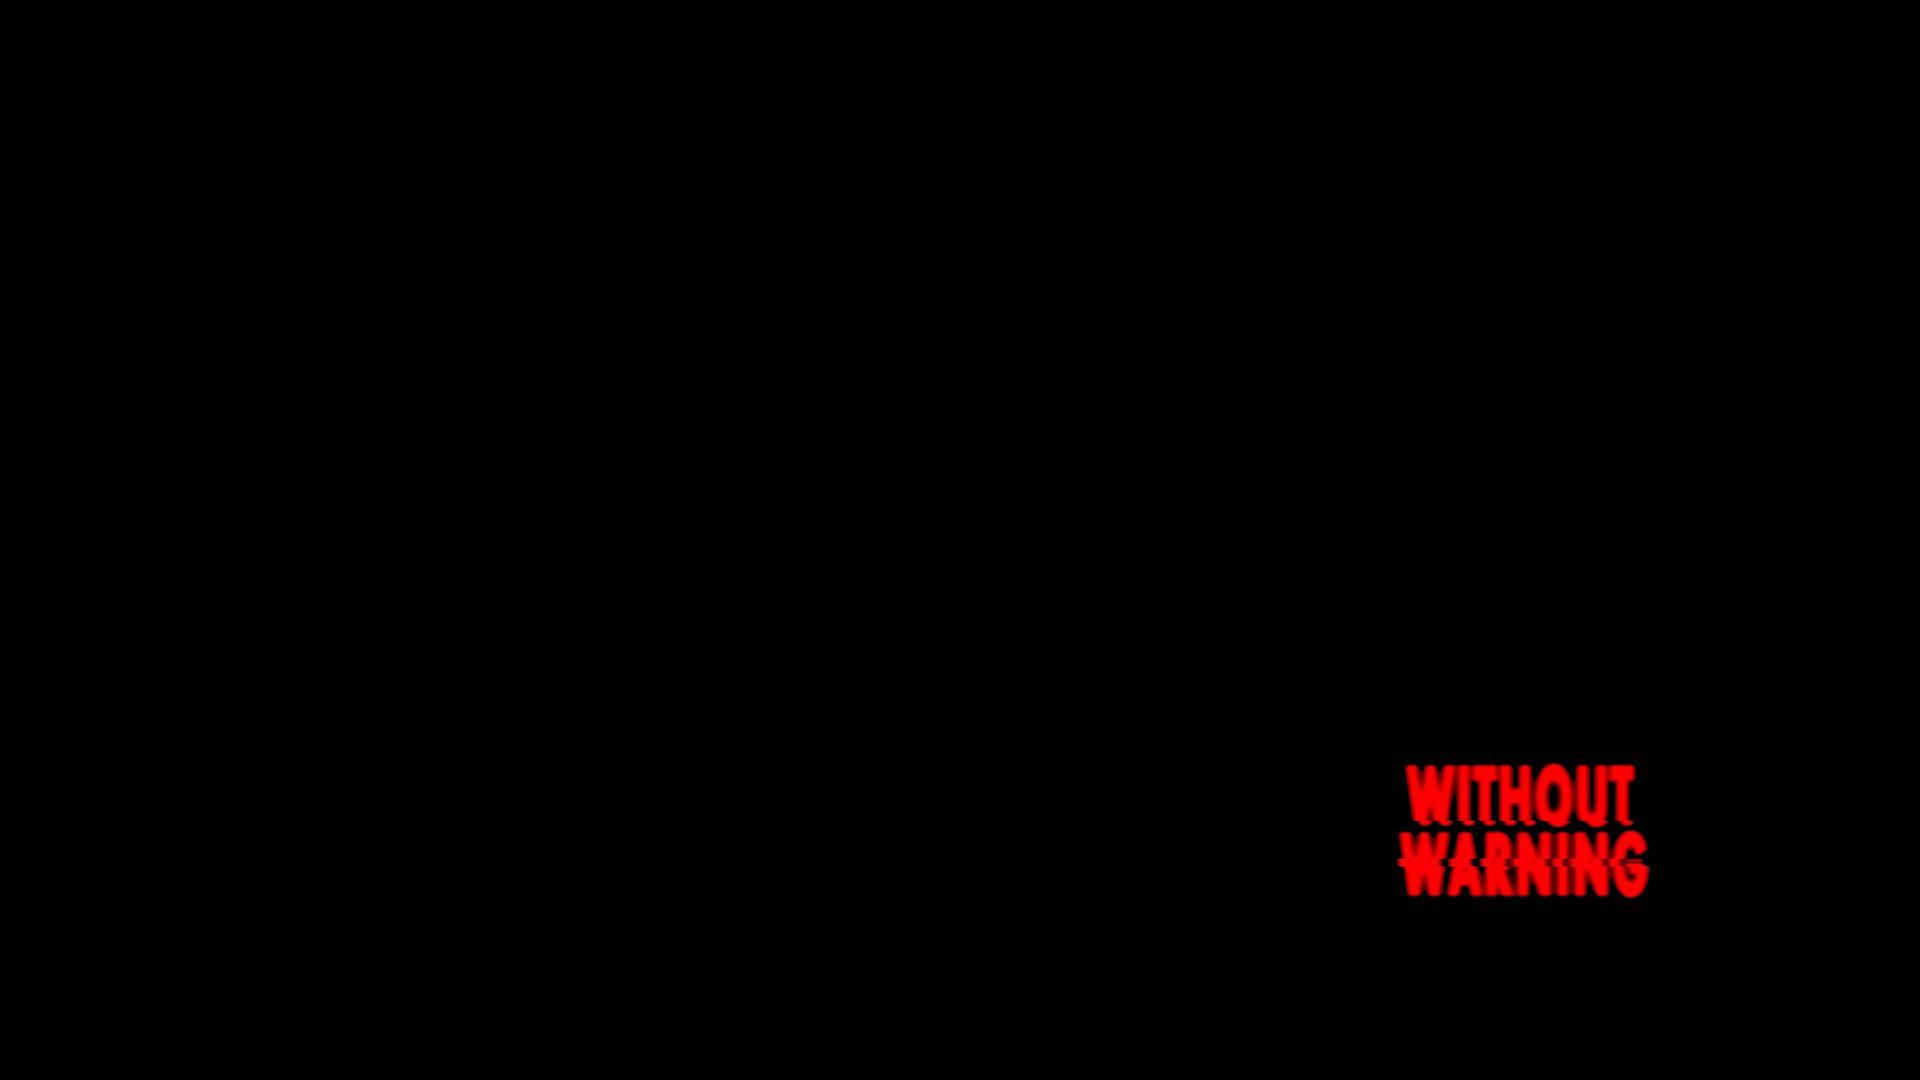 minimalist Without Warning wallpapers